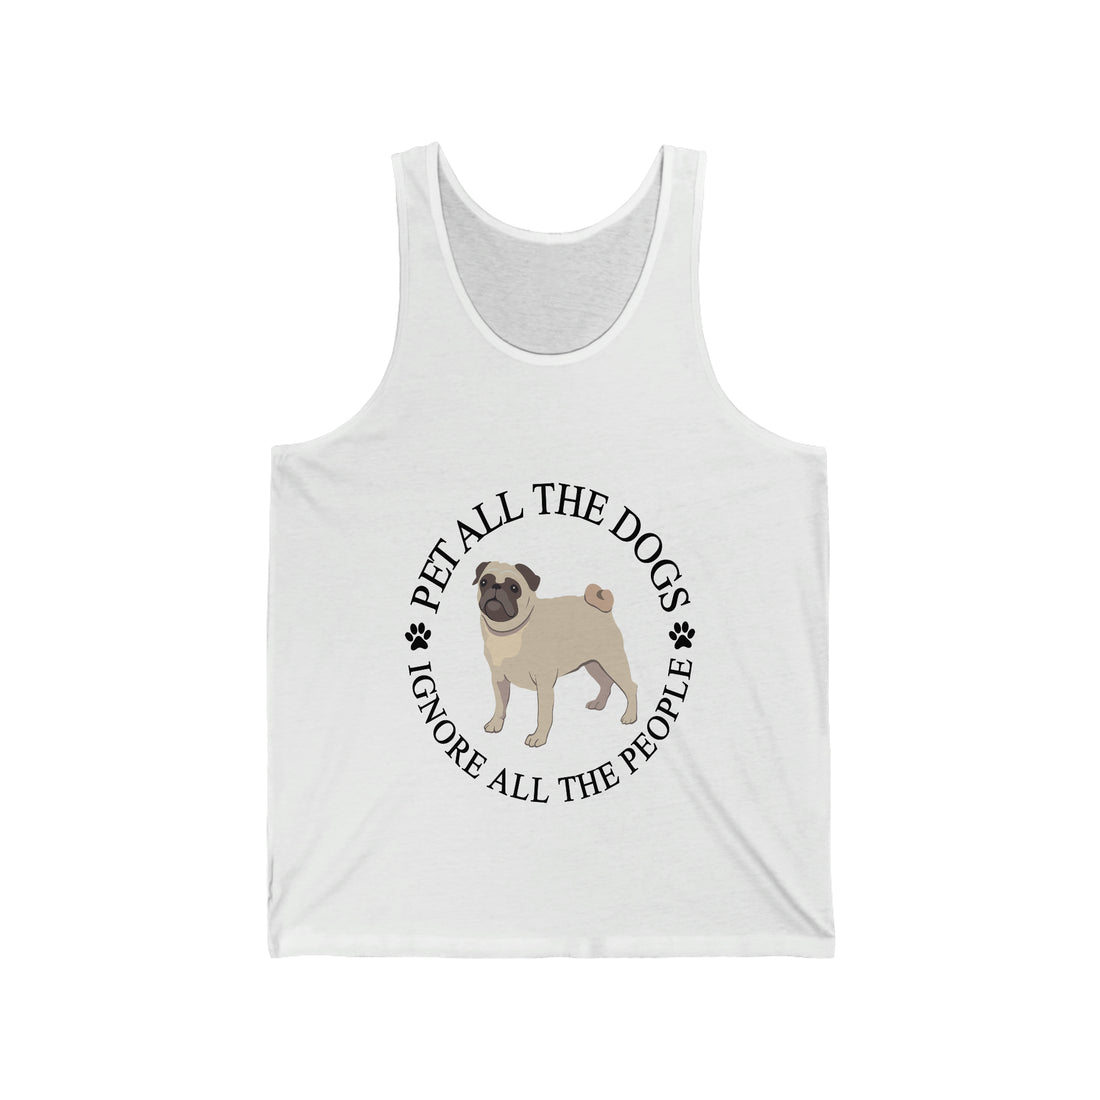 Pet All The Dogs Ignore All The People  - Unisex Jersey Tank Top